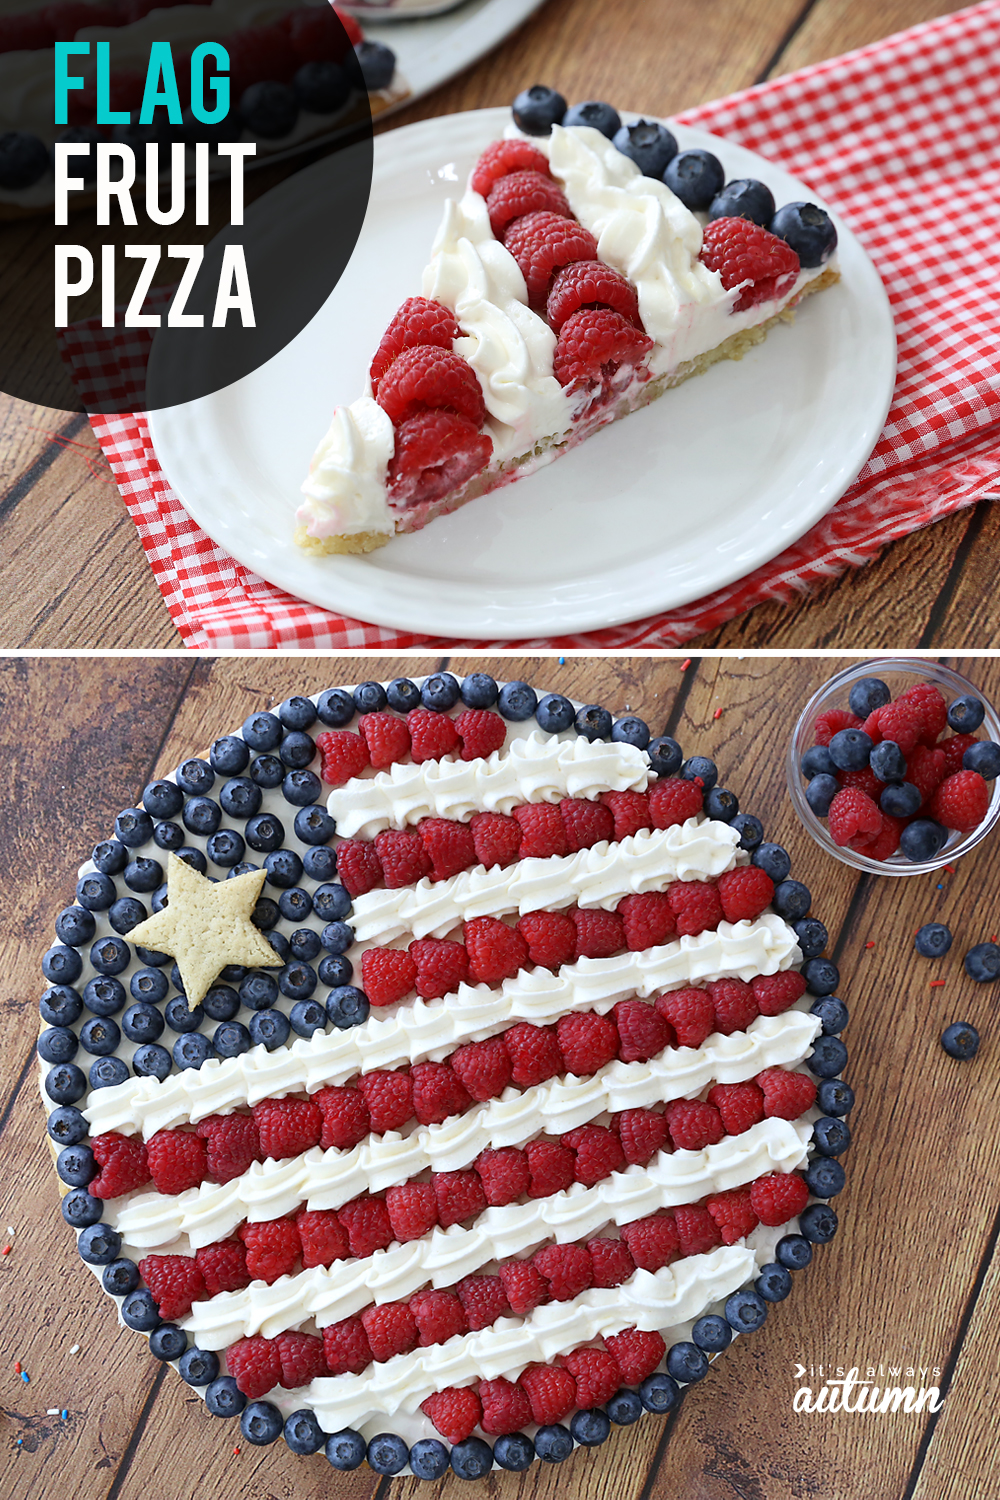 Collage: a slice of American flag fruit pizza; a full fruit pizza decorated to look like an American flag